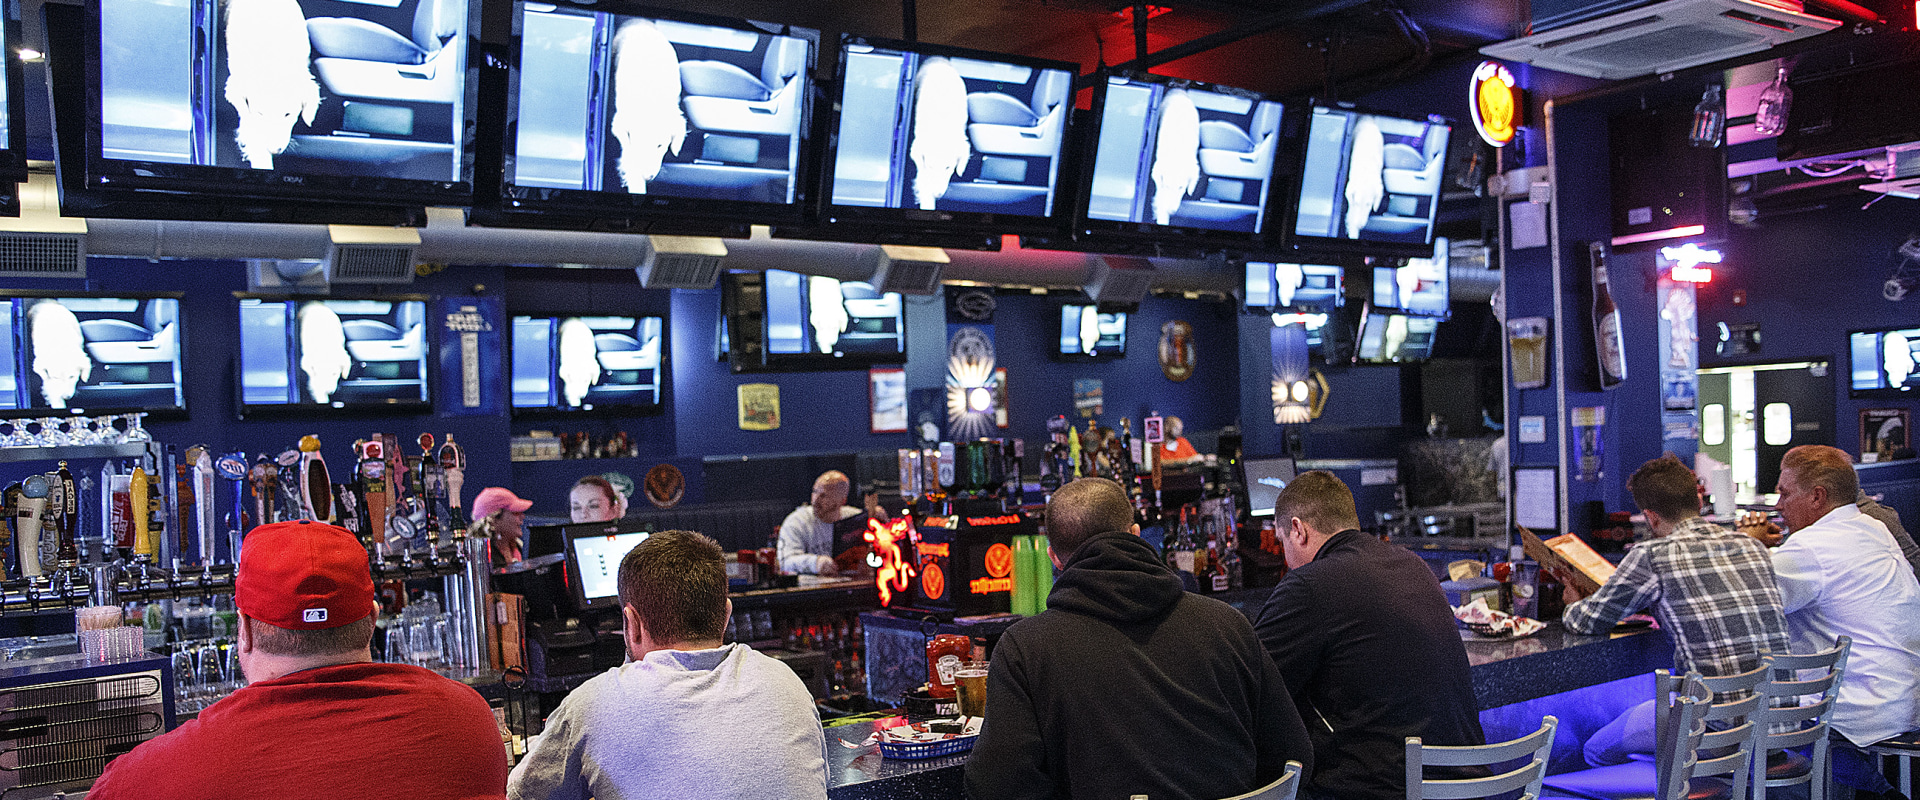 What Makes a Sports Bar Stand Out